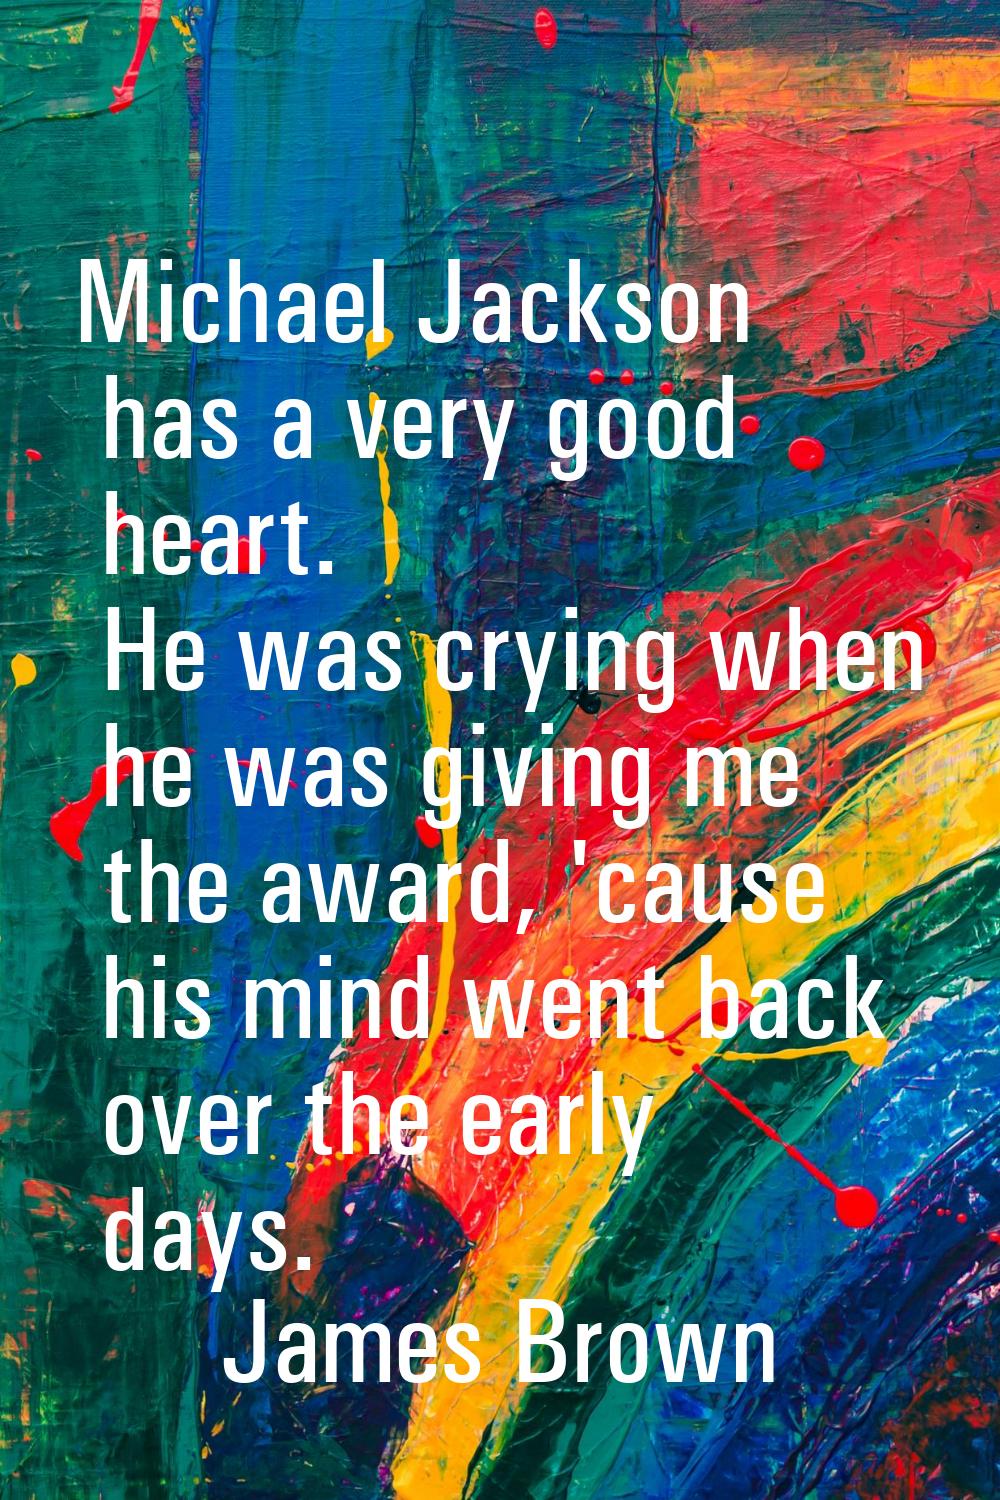 Michael Jackson has a very good heart. He was crying when he was giving me the award, 'cause his mi